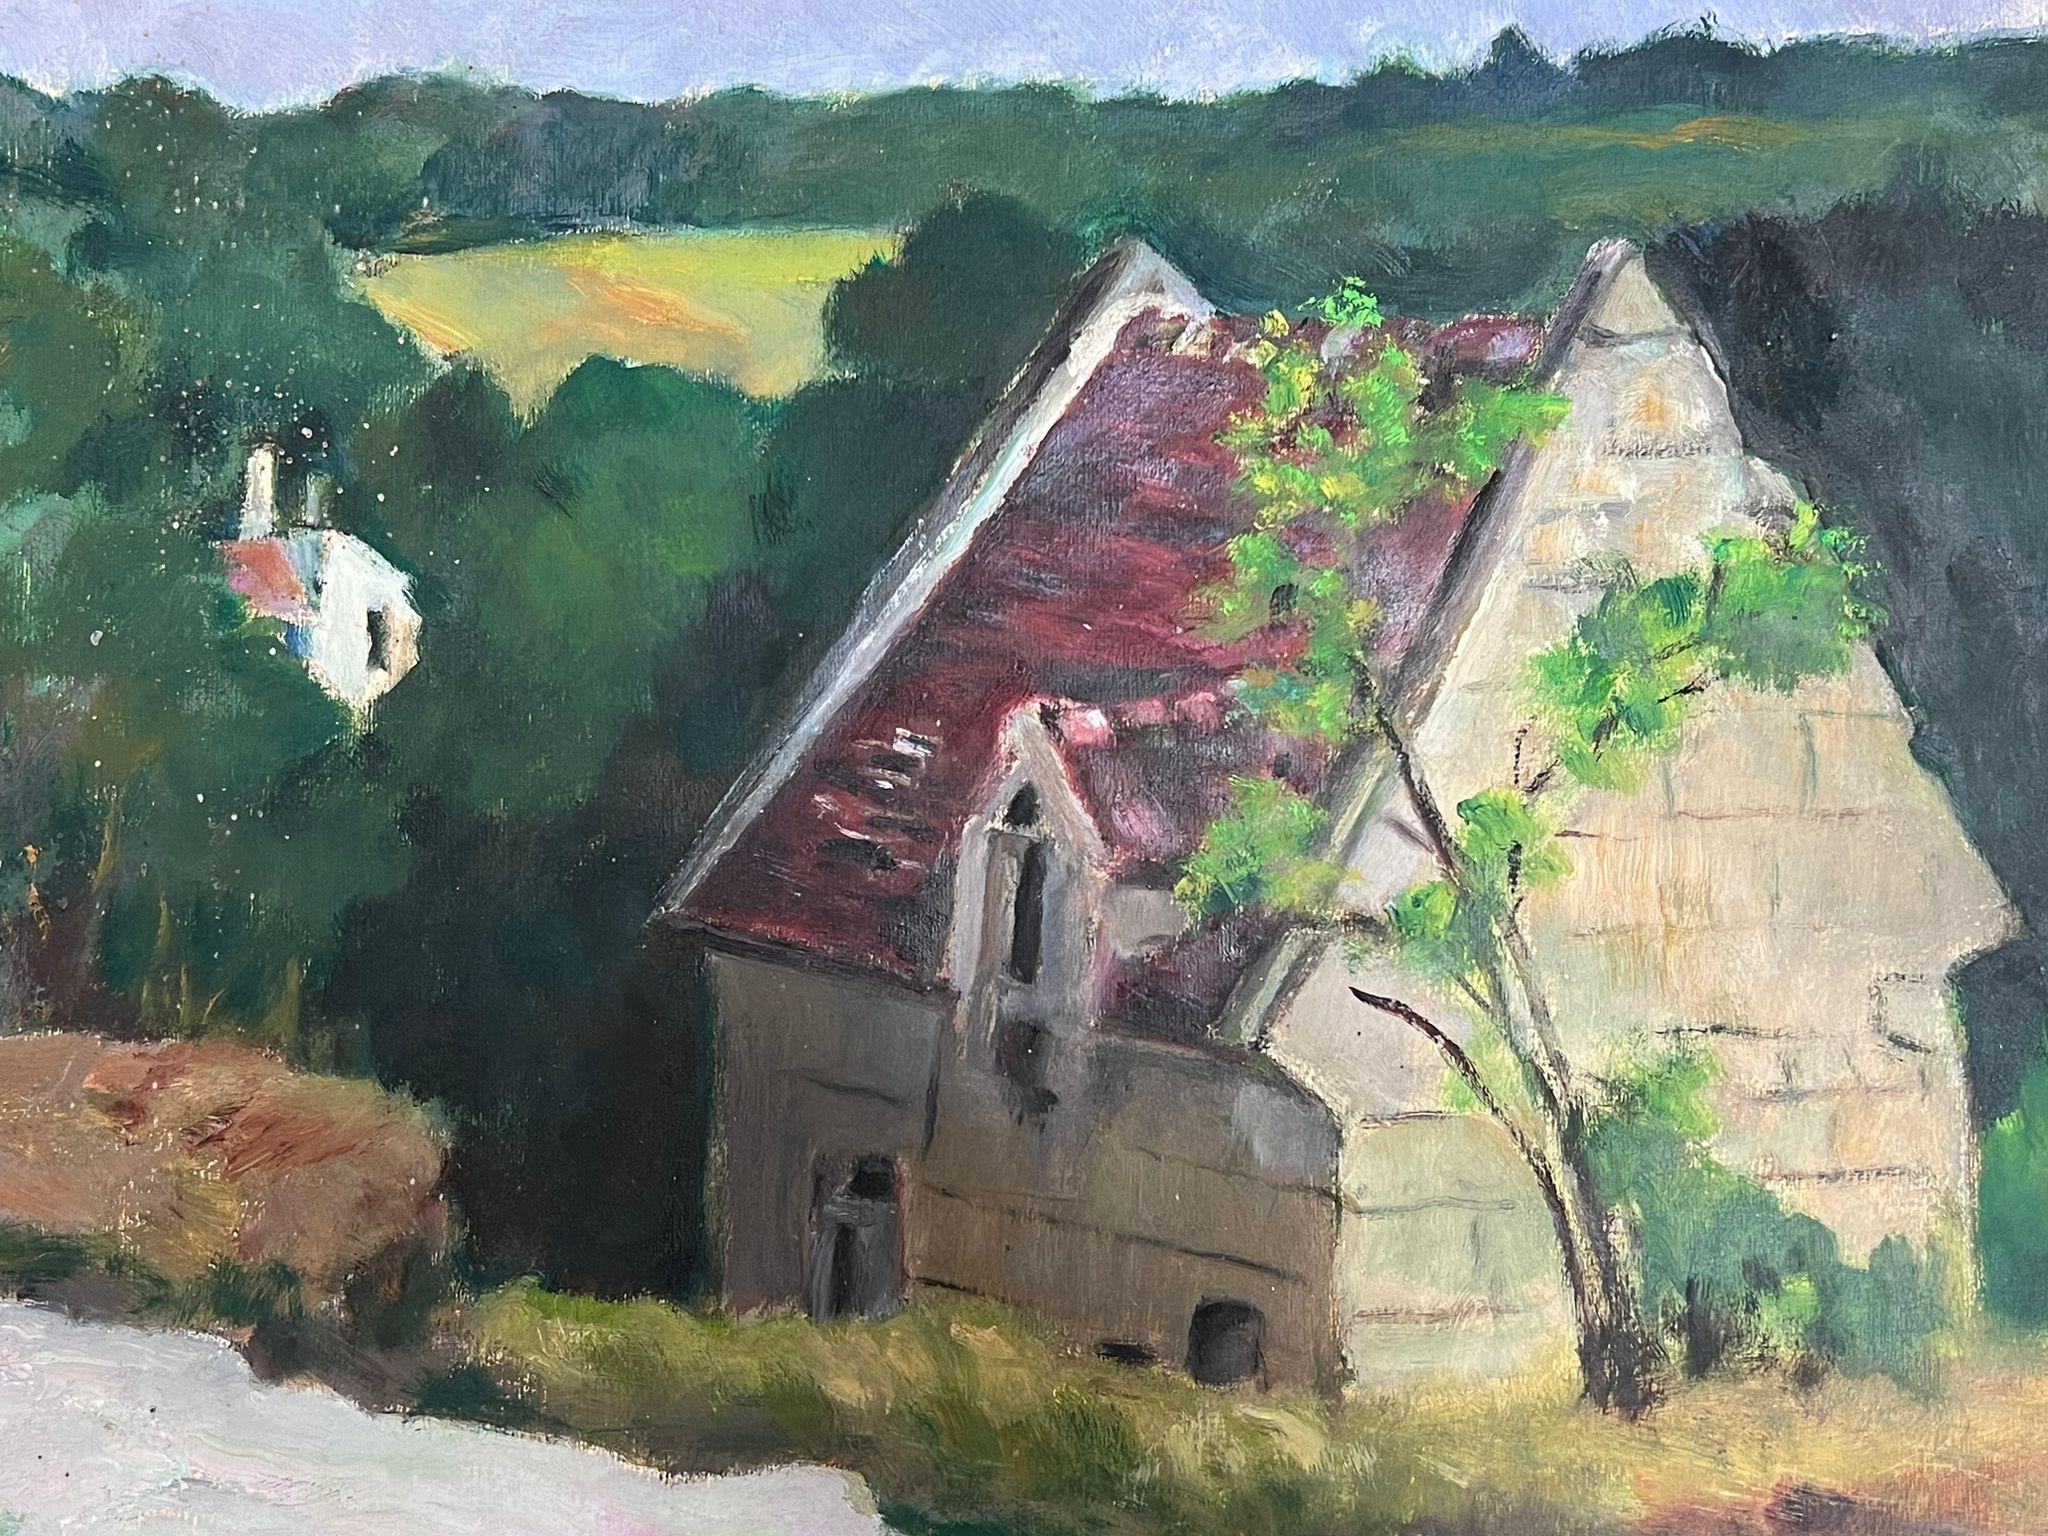 House In Forest
by Louise Alix, French 1950's Impressionist 
oil on artist paper, unframed
painting: 13 x 16 inches
provenance: from a large private collection of this artists work in Northern France
condition: original, good and sound condition